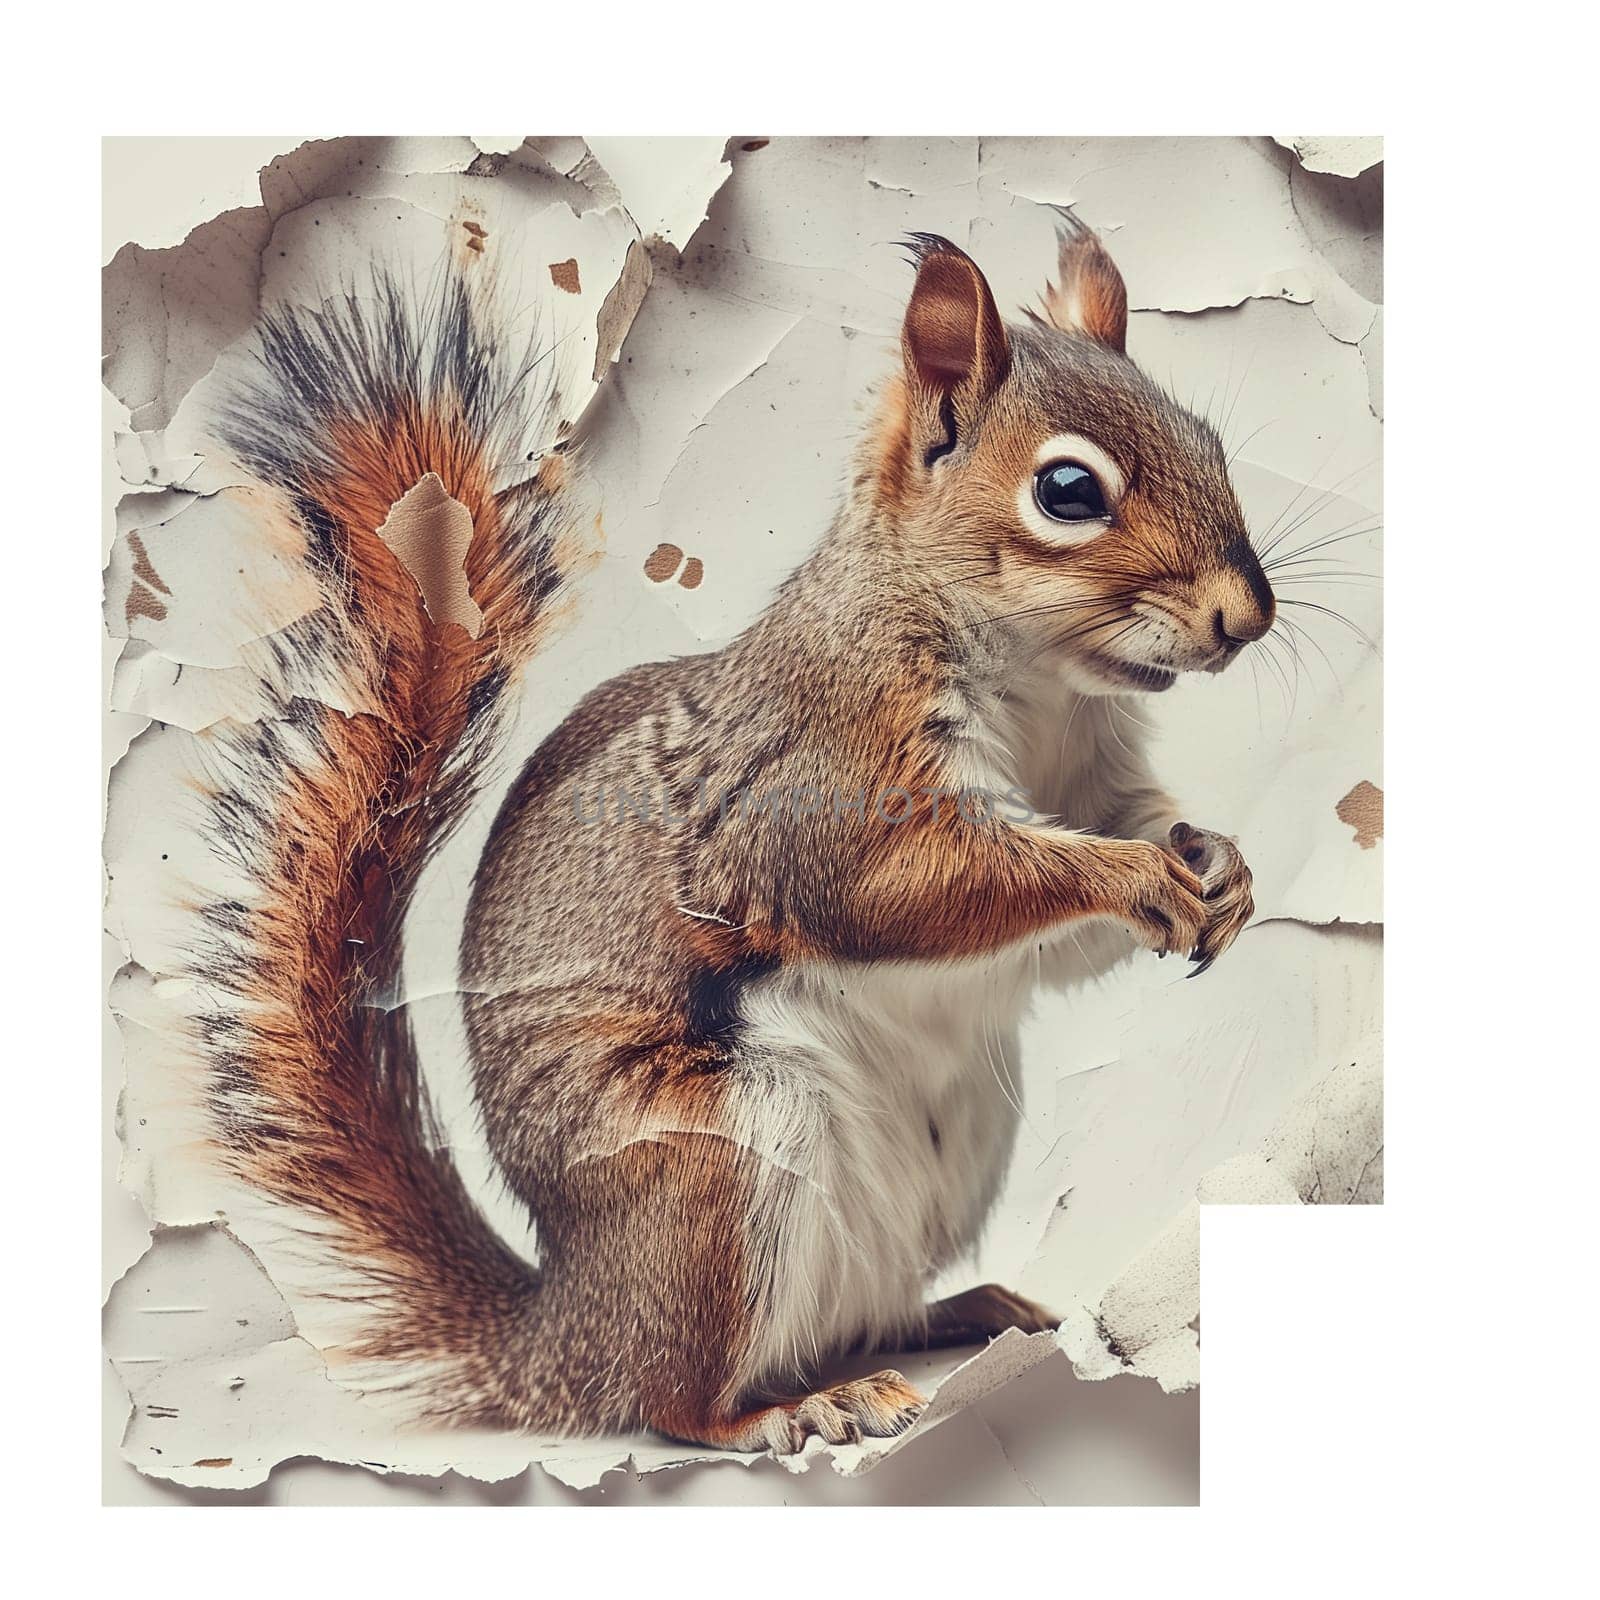 Cut out sticker of a squirrel on crumpled paper by Dustick